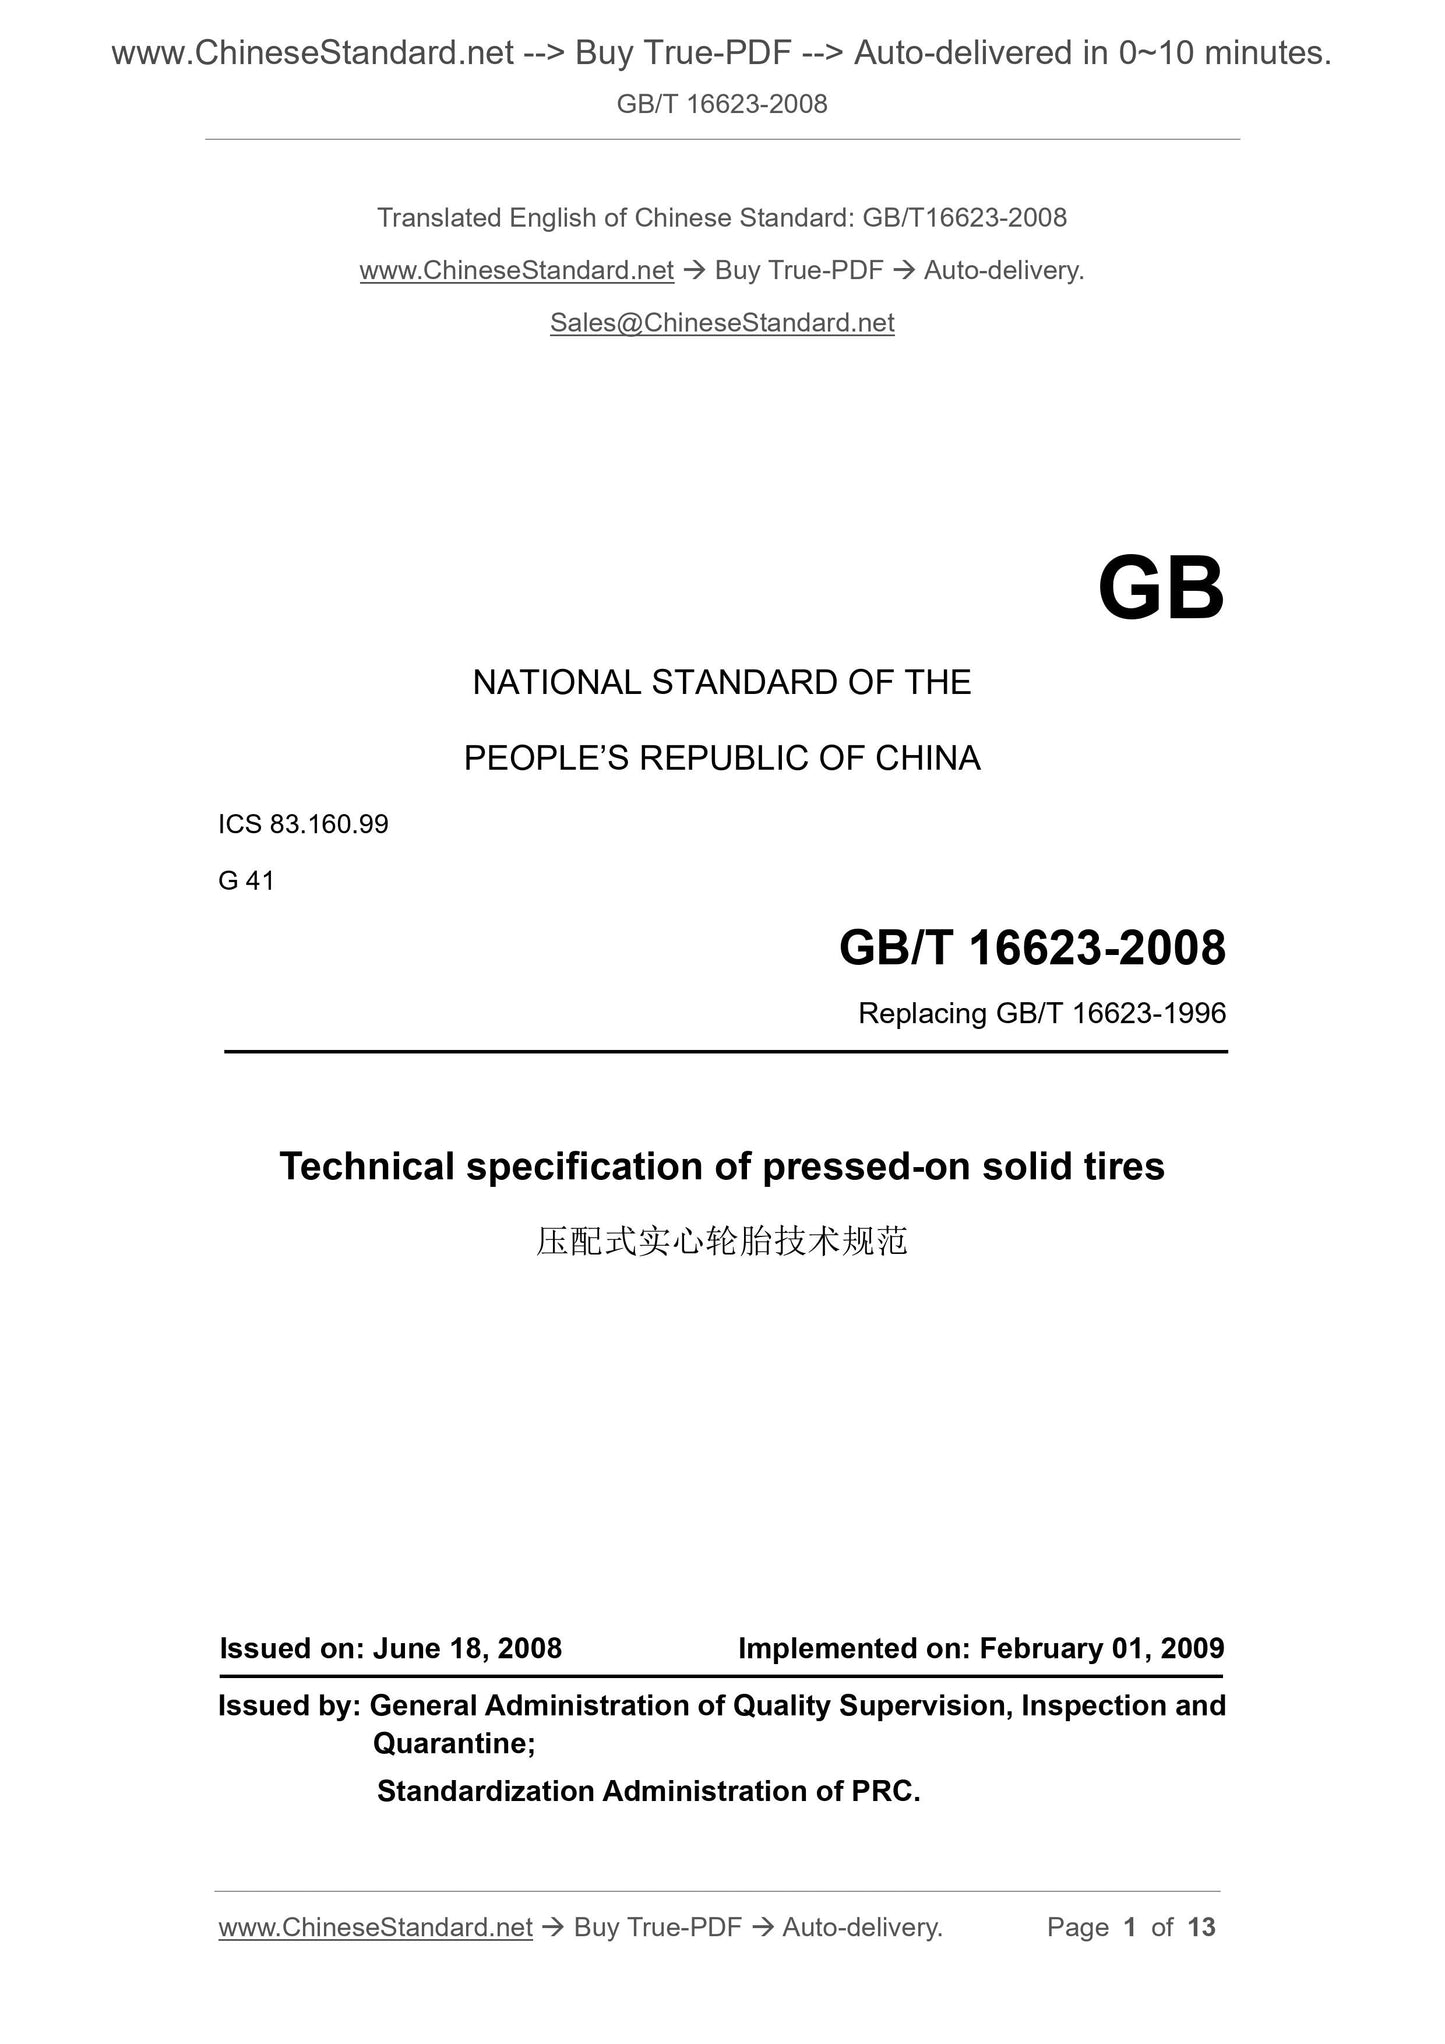 GB/T 16623-2008 Page 1